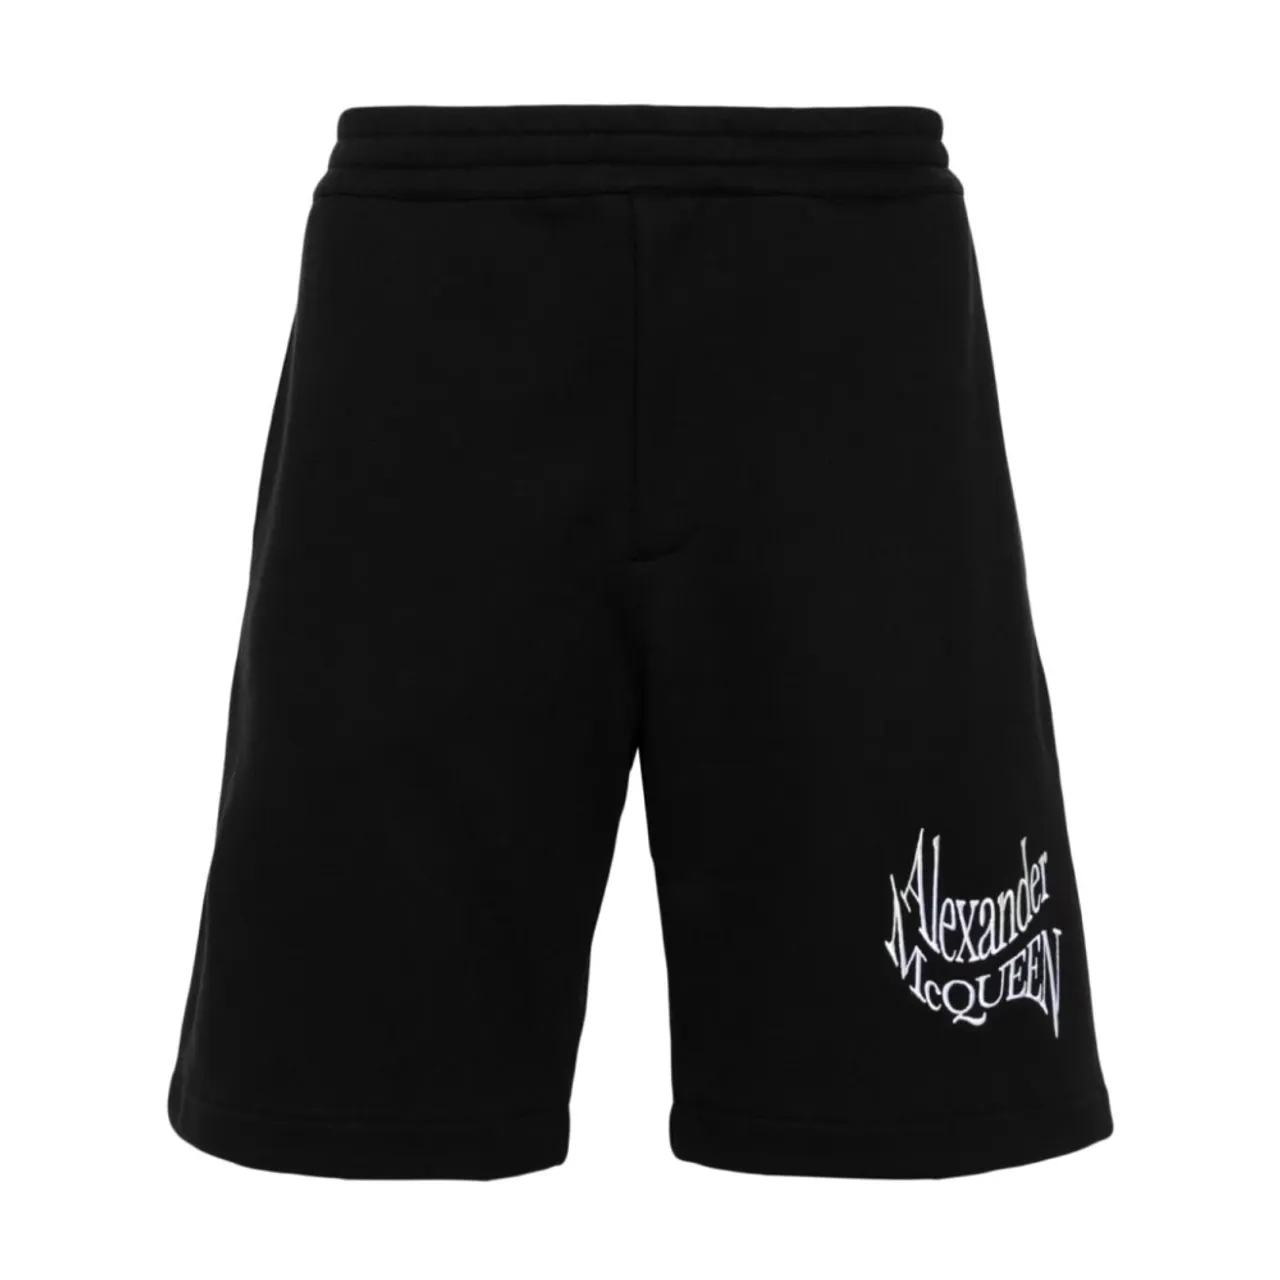 Alexander McQueen , Black Cotton Shorts with Embroidered Logo ,Black male, Sizes: